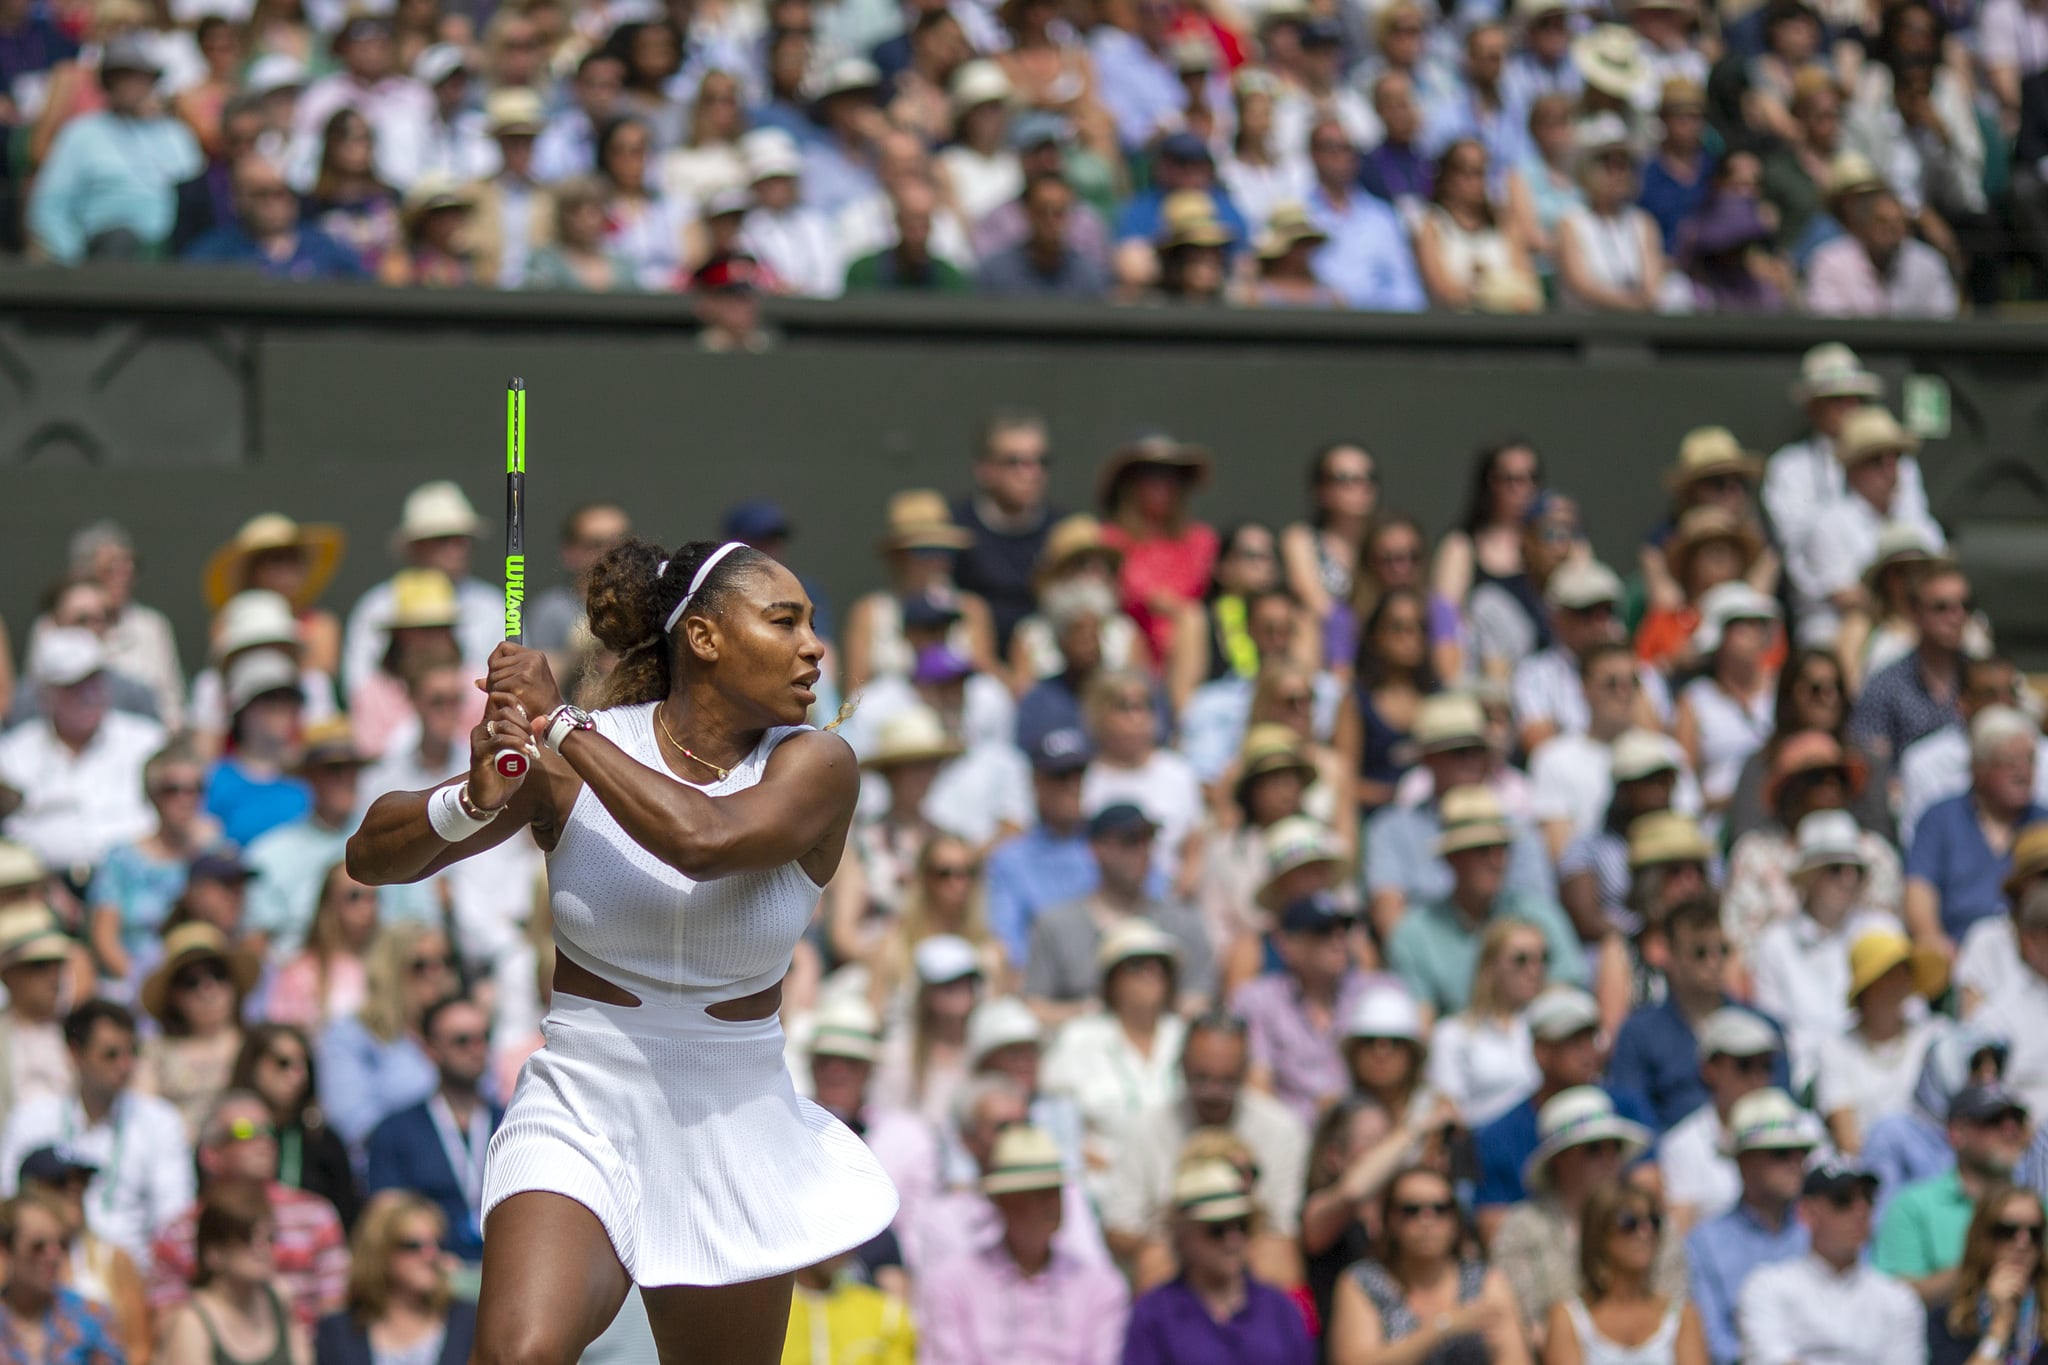 LONDON, ENGLAND - July 13:   Serena Williams of the United States in action against Simona Halep of Romania during the Ladies Singles Final on Centre Court during the Wimbledon Lawn Tennis Championships at the All England Lawn Tennis and Croquet Club at Wimbledon on July 13, 2019 in London, England. (Photo by Tim Clayton/Corbis via Getty Images)